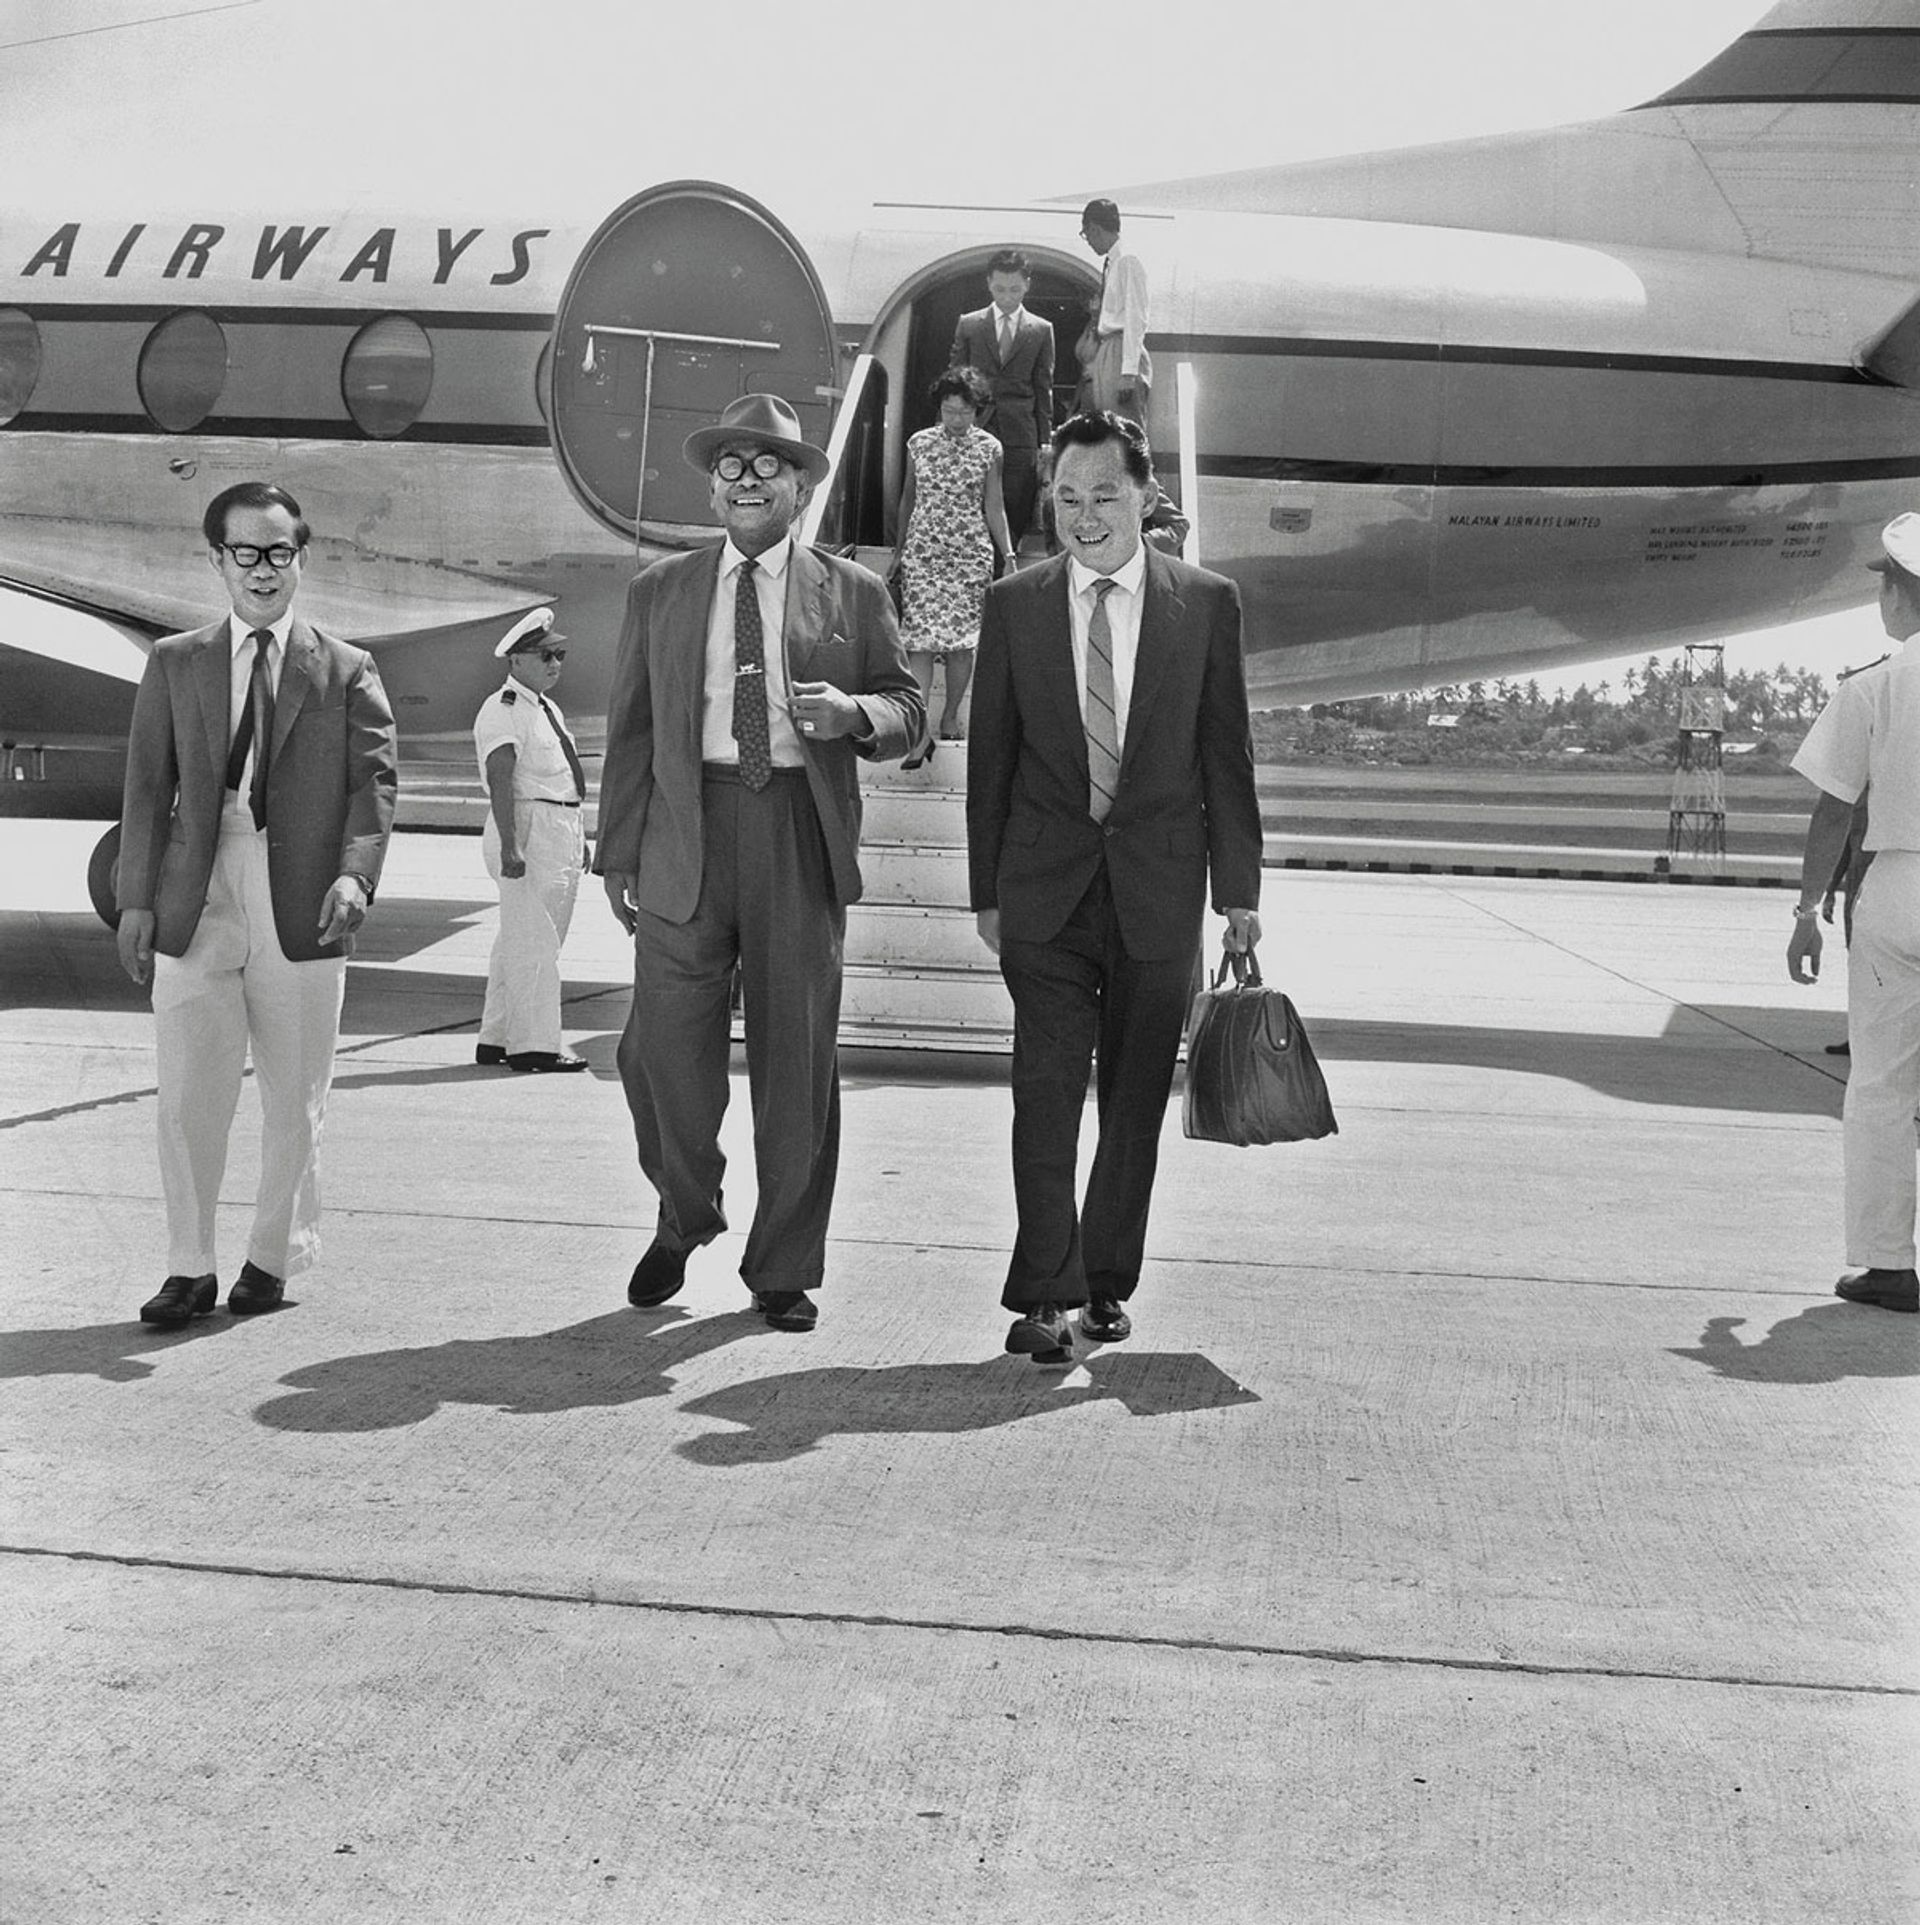 Arriving together with Malayan Prime Minister Tunku Abdul Rahman (centre) at Paya Lebar Airport, where they were received by Deputy PM Toh Chin Chye (left) on Oct 24, 1961. Mr and Mrs Lee were returning from a two-week holiday in Kuala Lumpur, while the Tunku, who was on his way to Vietnam, would visit London the next month for talks on the formation of Malaysia. ST Photo: Chew Boon Chin